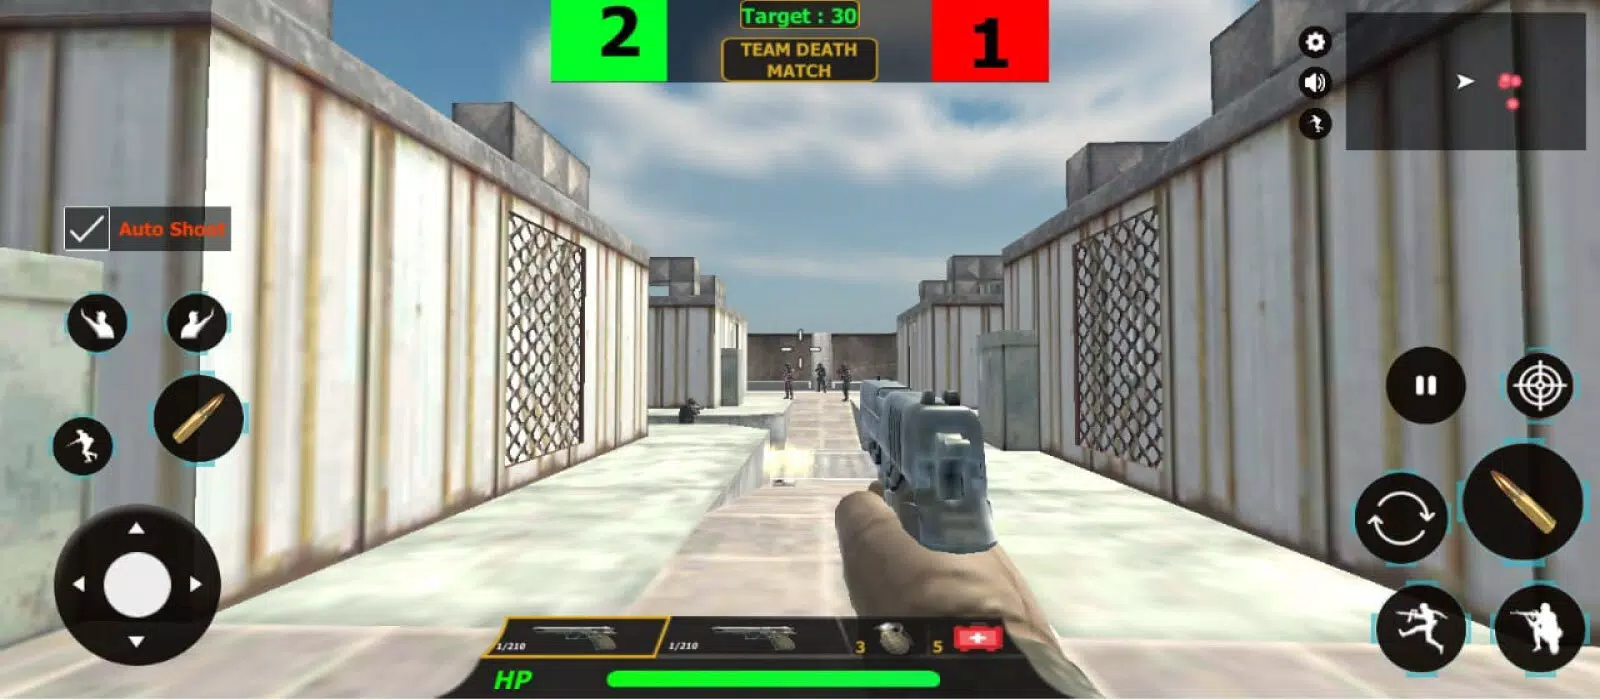 Best games like Counter-Strike on Android